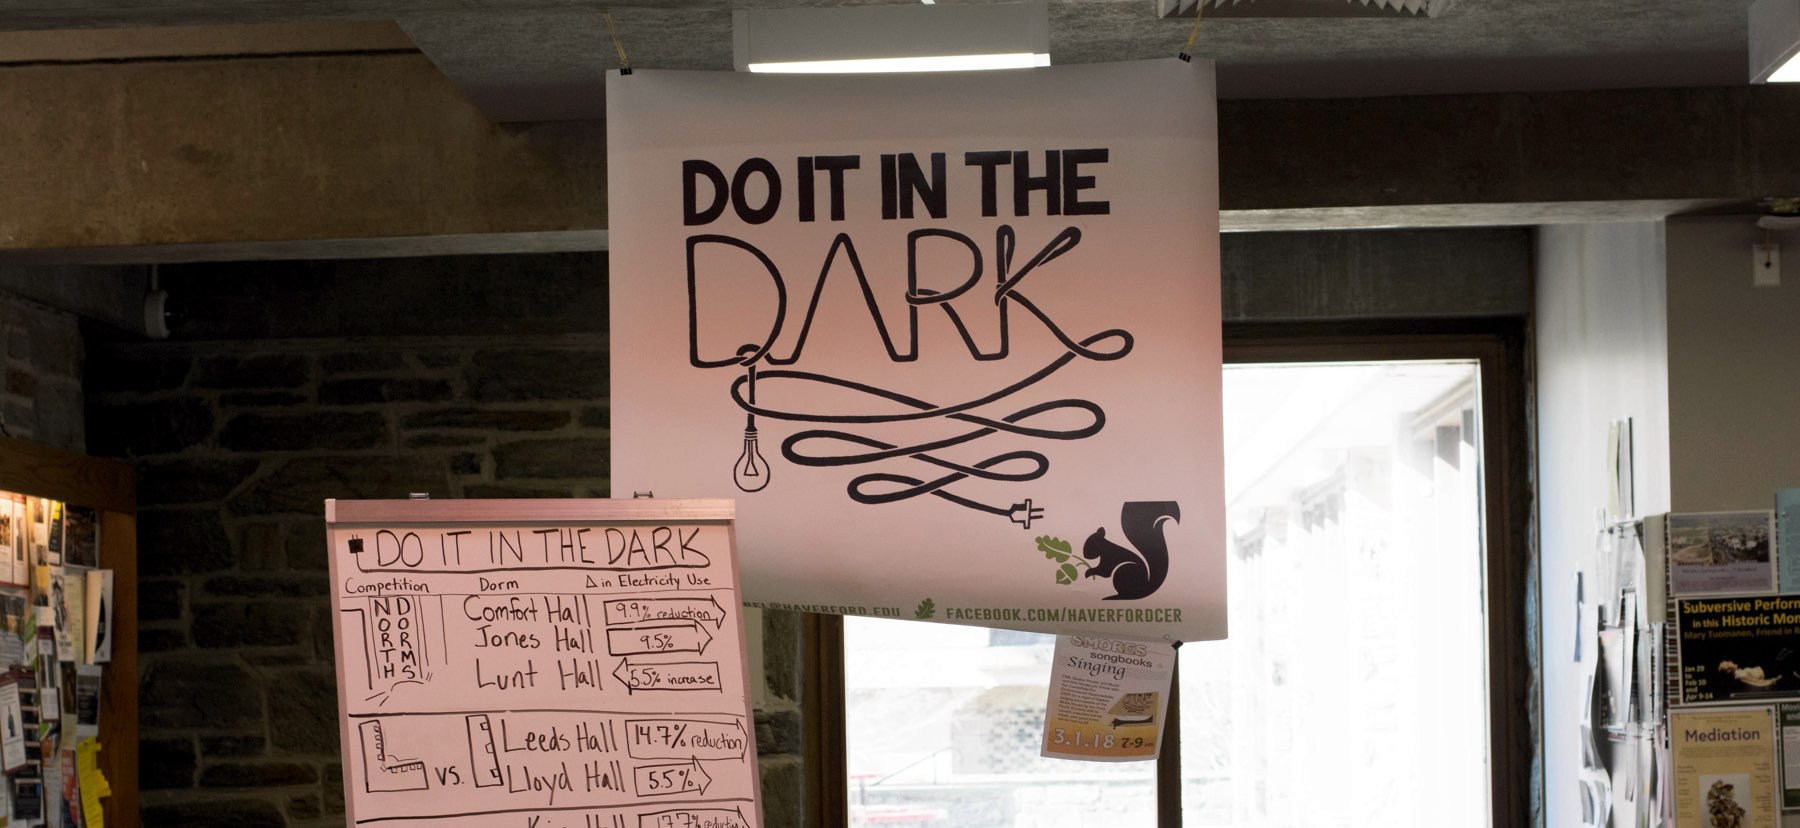 A Do It In The Dark banner hanging in the Dining Center